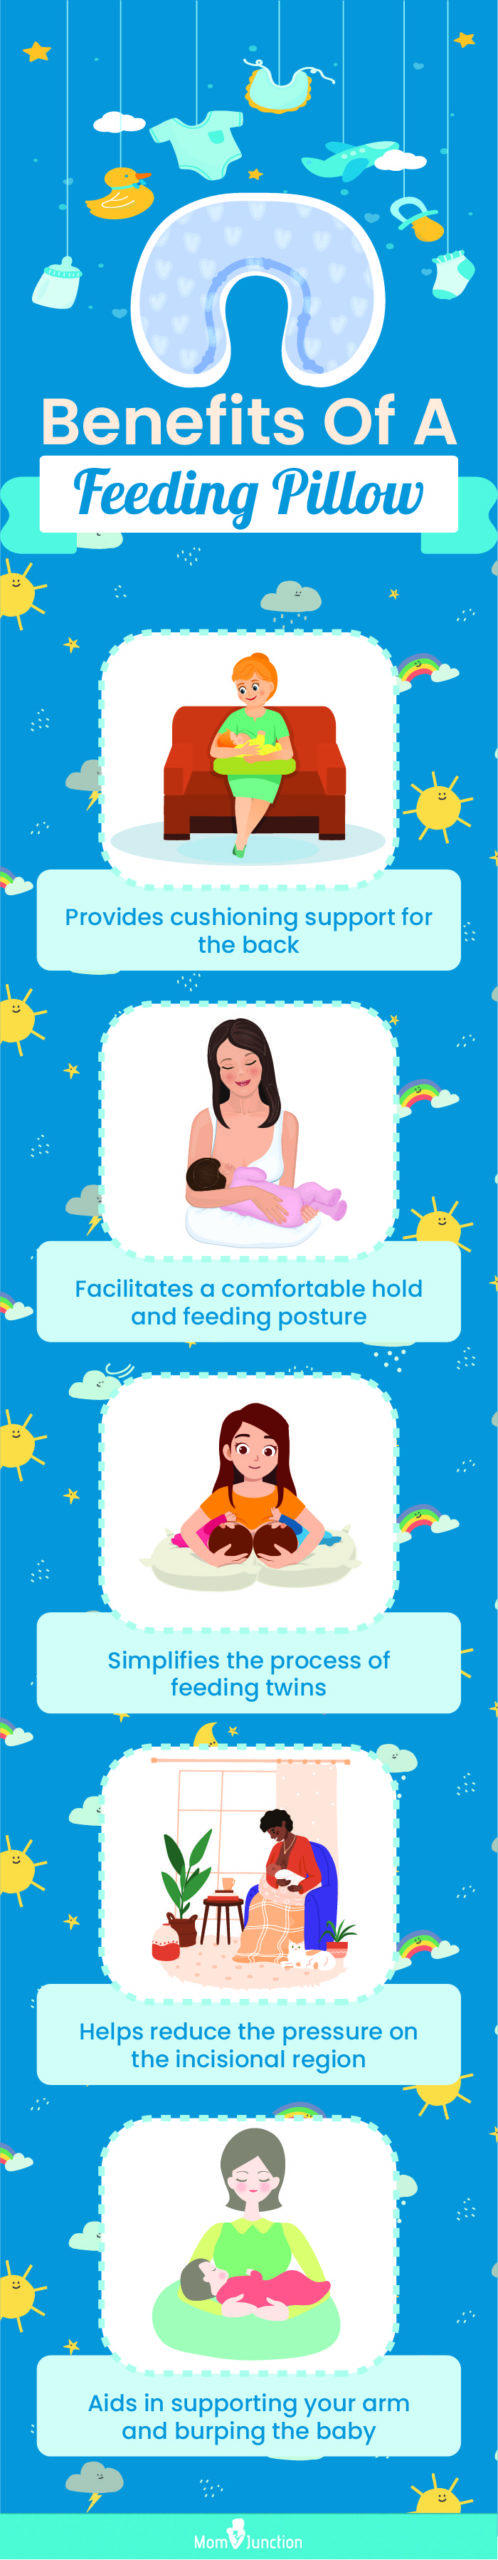 advantages of a feeding pillow (infographic)